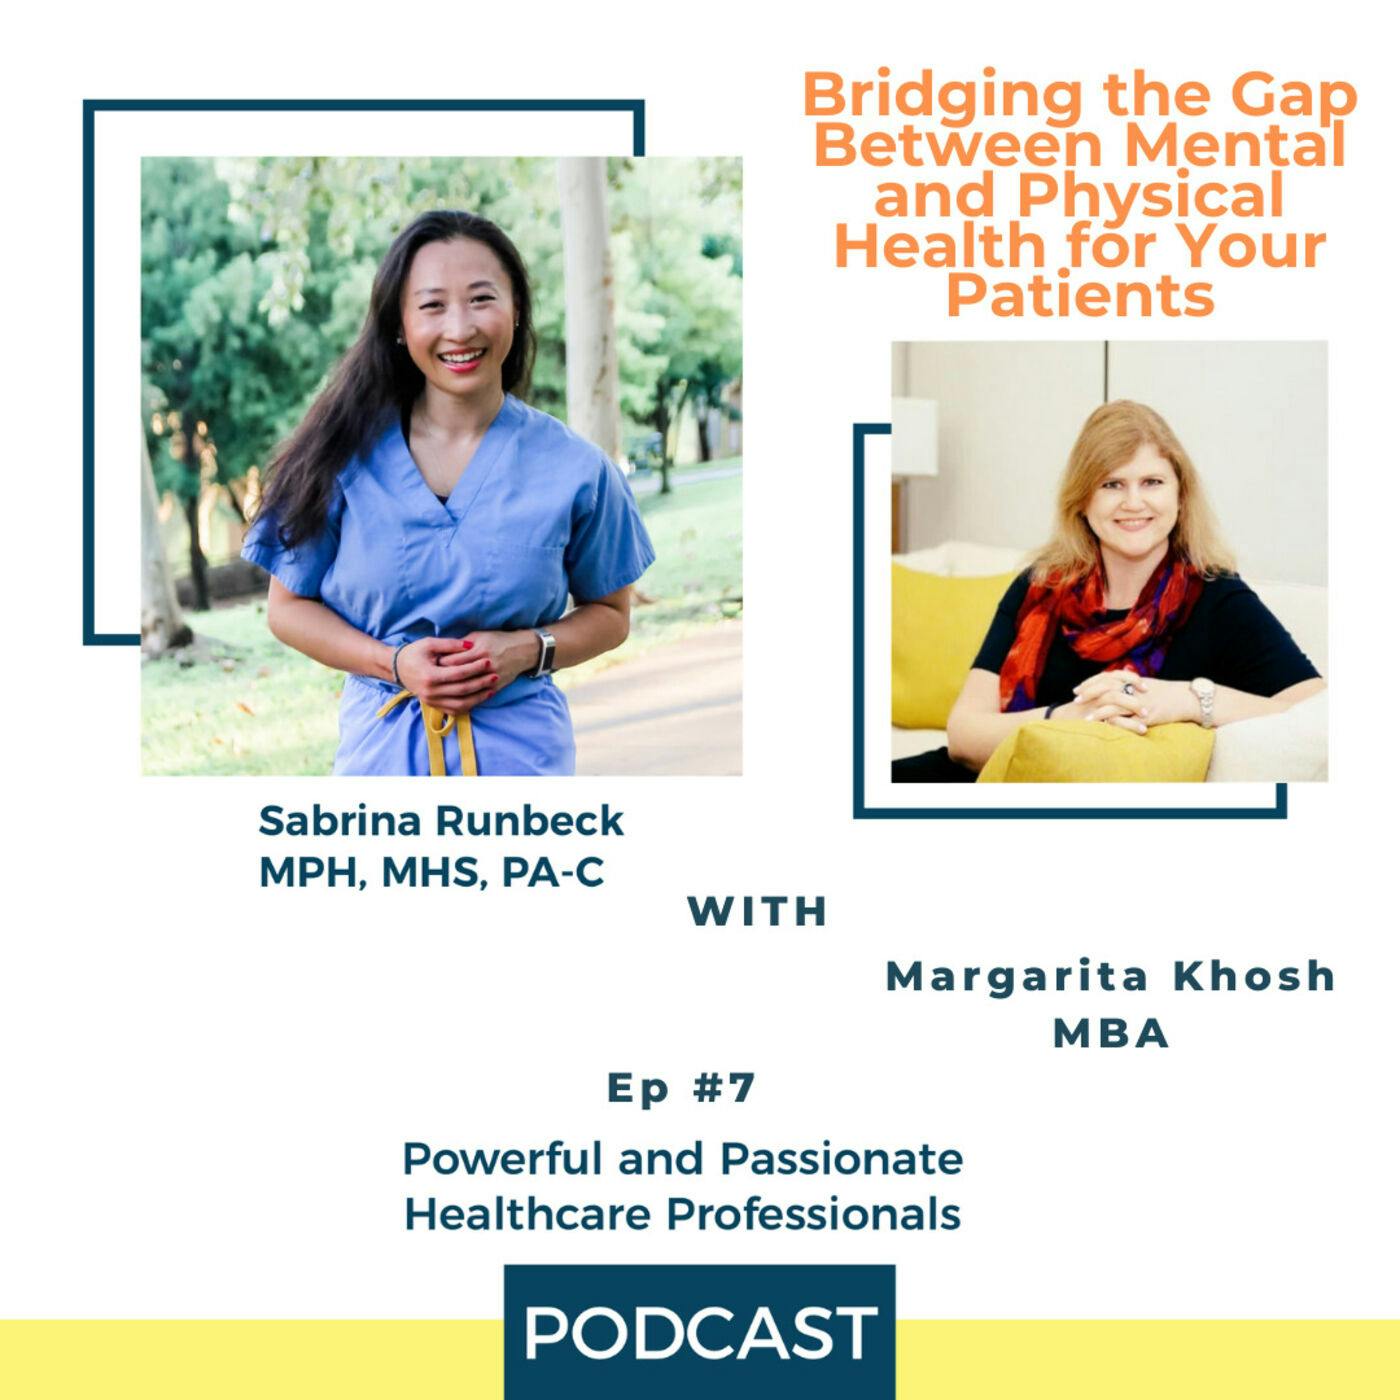 Ep 7 – Bridging the Gap Between Mental and Physical Health for Your Patients with Margarita Khosh